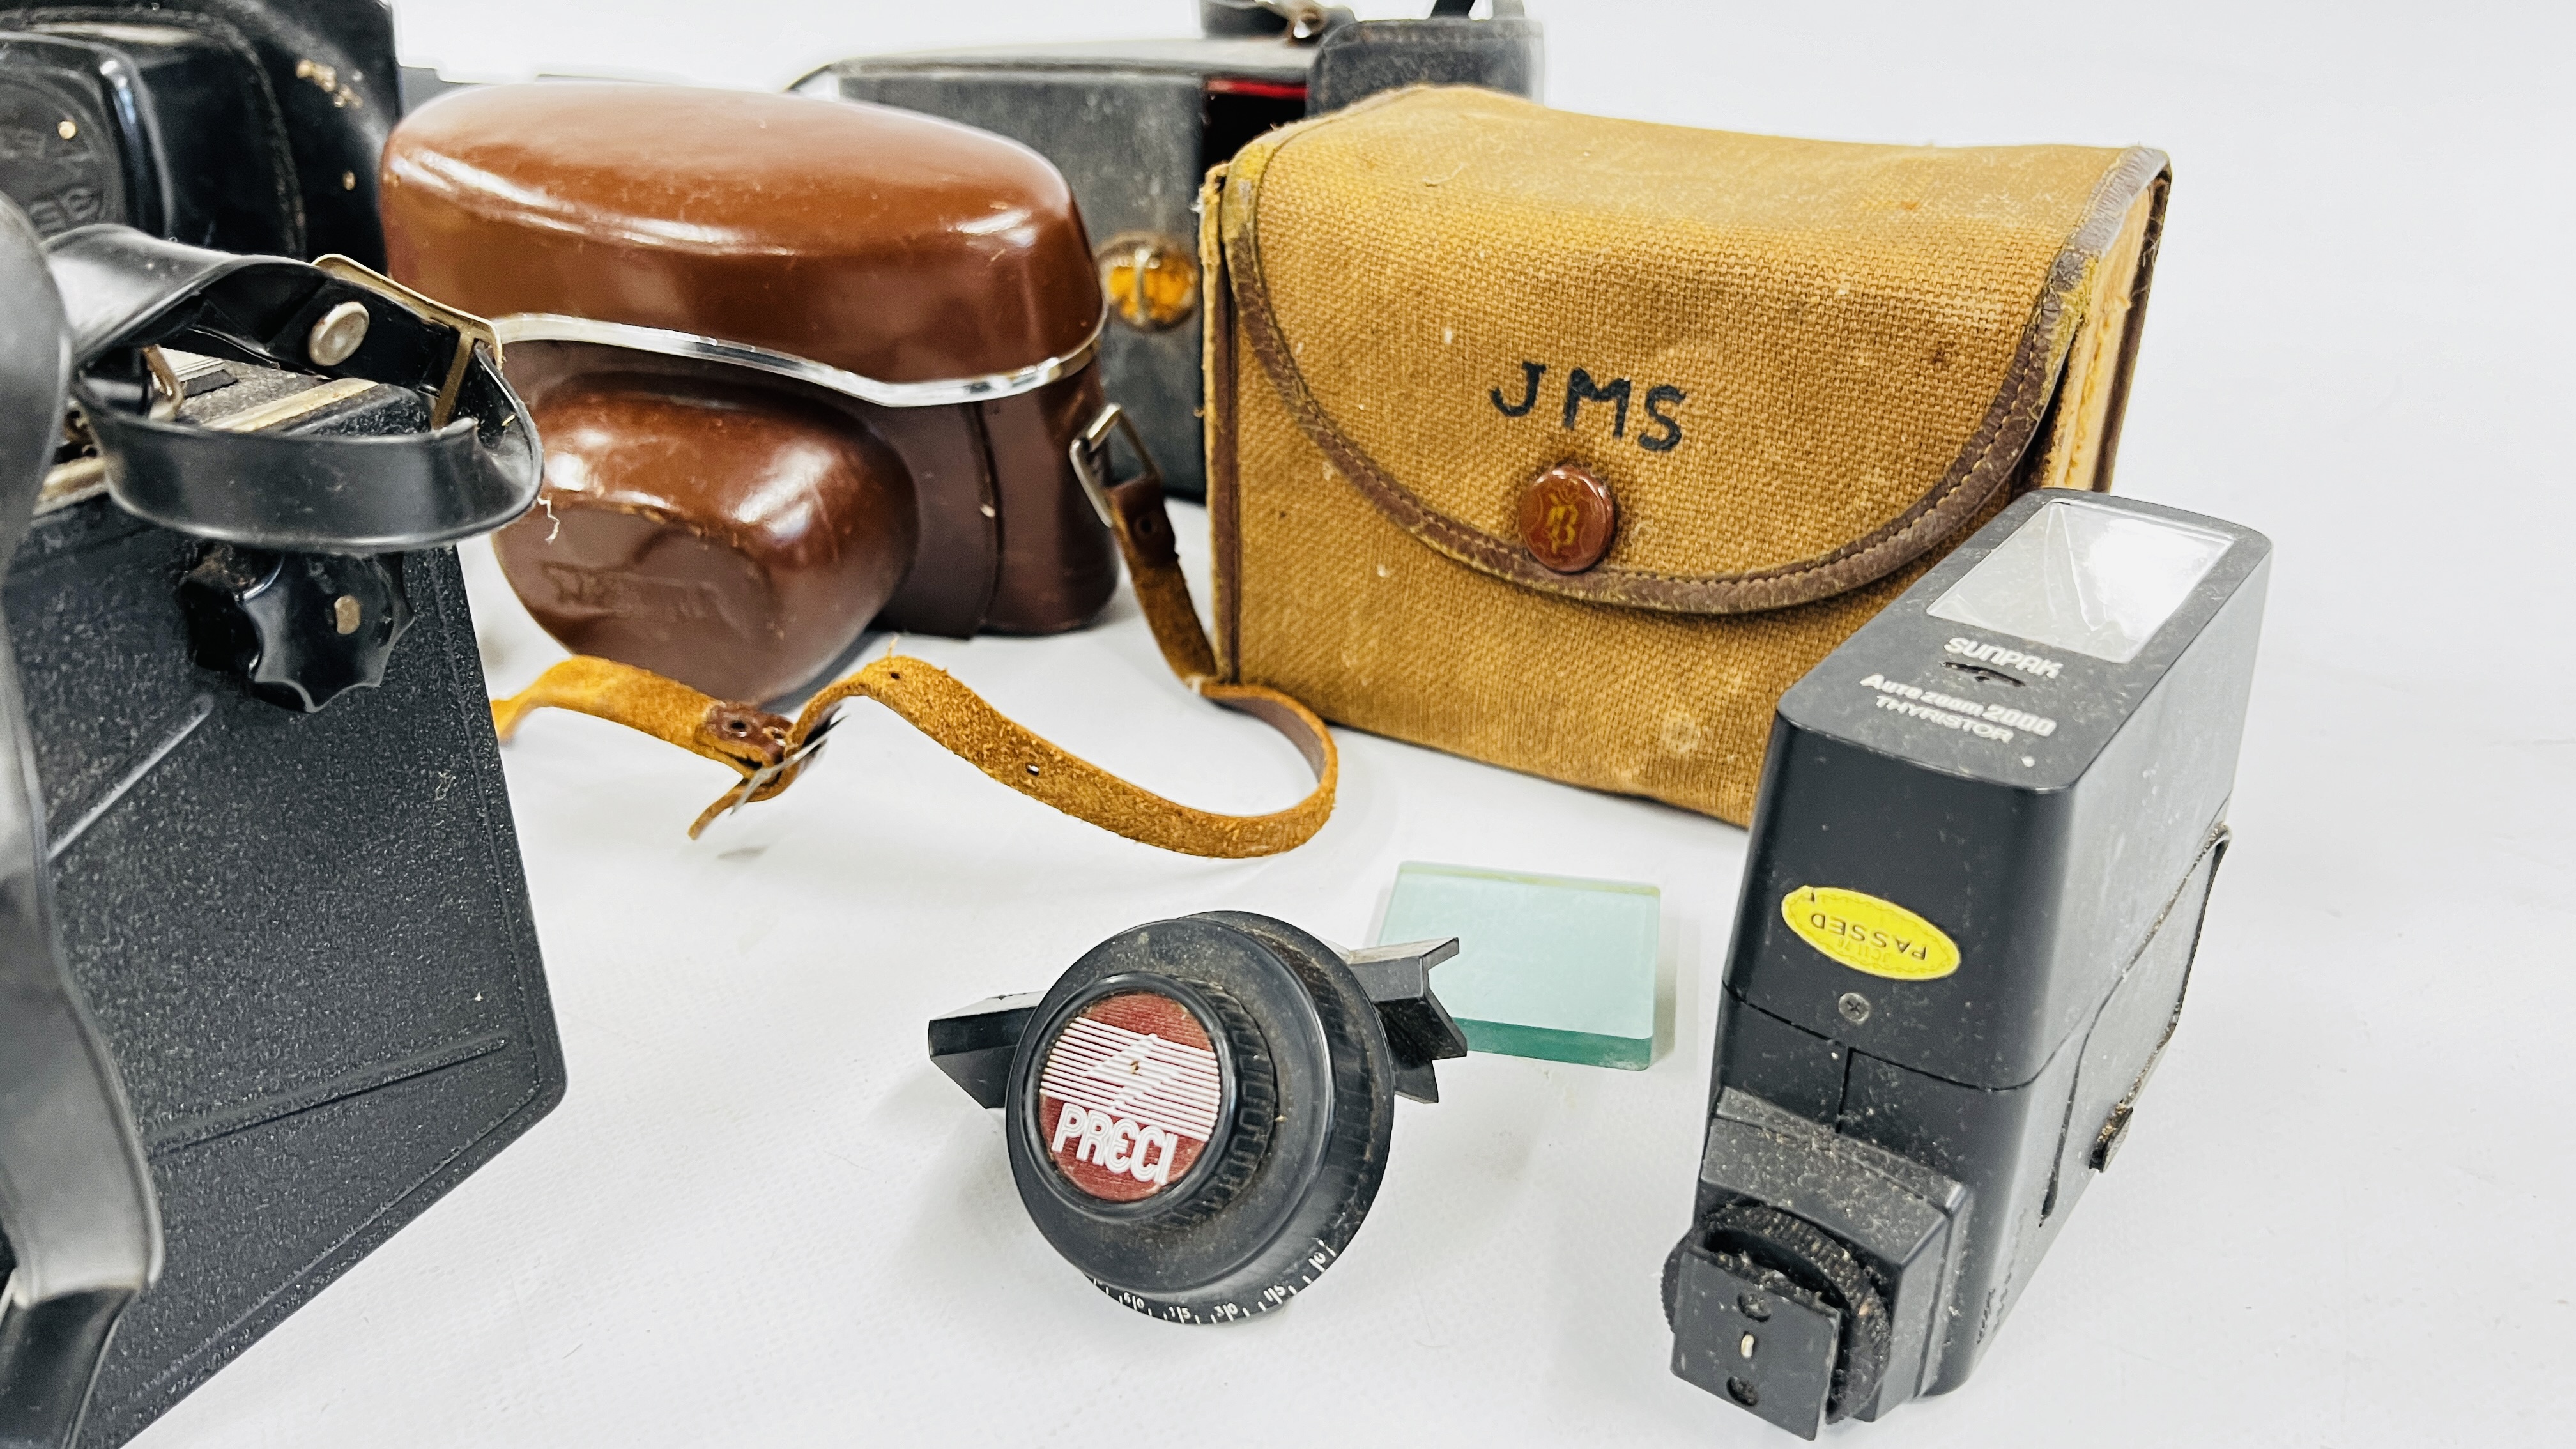 A BOX OF VINTAGE CAMERAS TO INCLUDE A KODAK BROWNIE 127, CORONET, YASHICA M612 6617 35MM CAMERA ETC. - Image 4 of 8